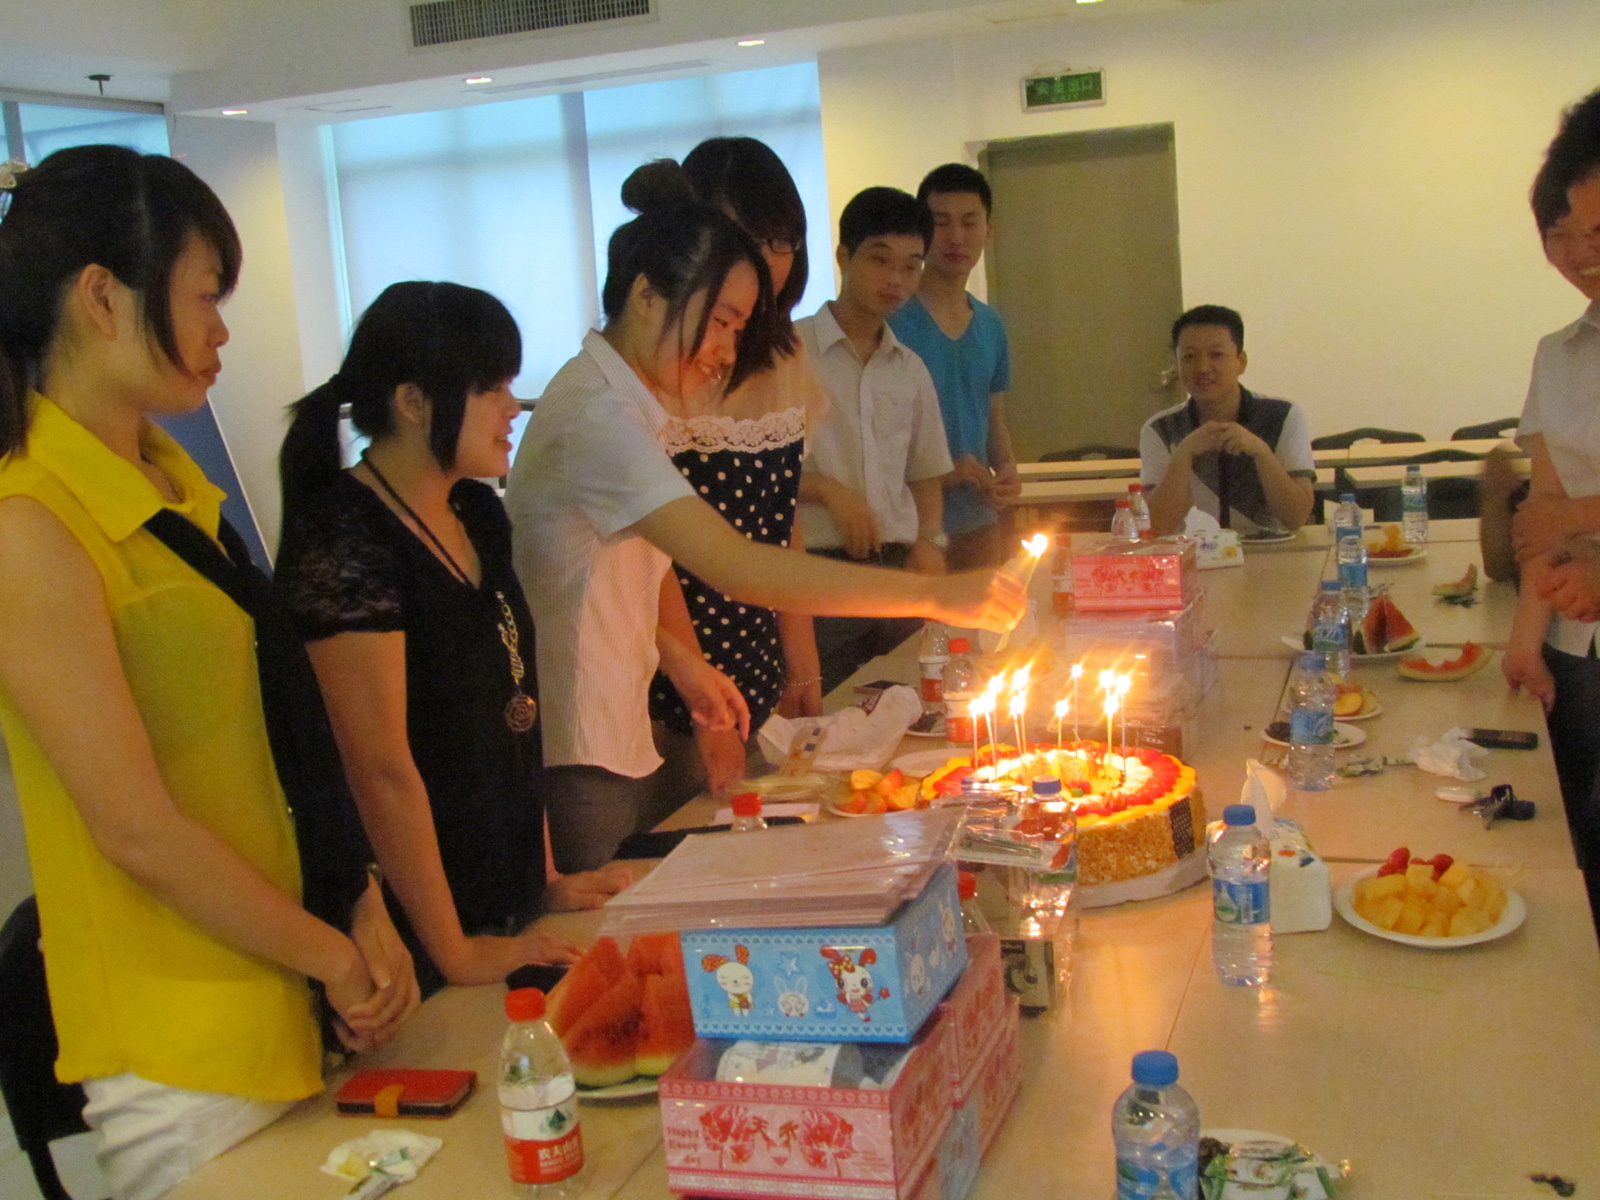 Luoxiang Aluminum holds monthly birthday party for employees